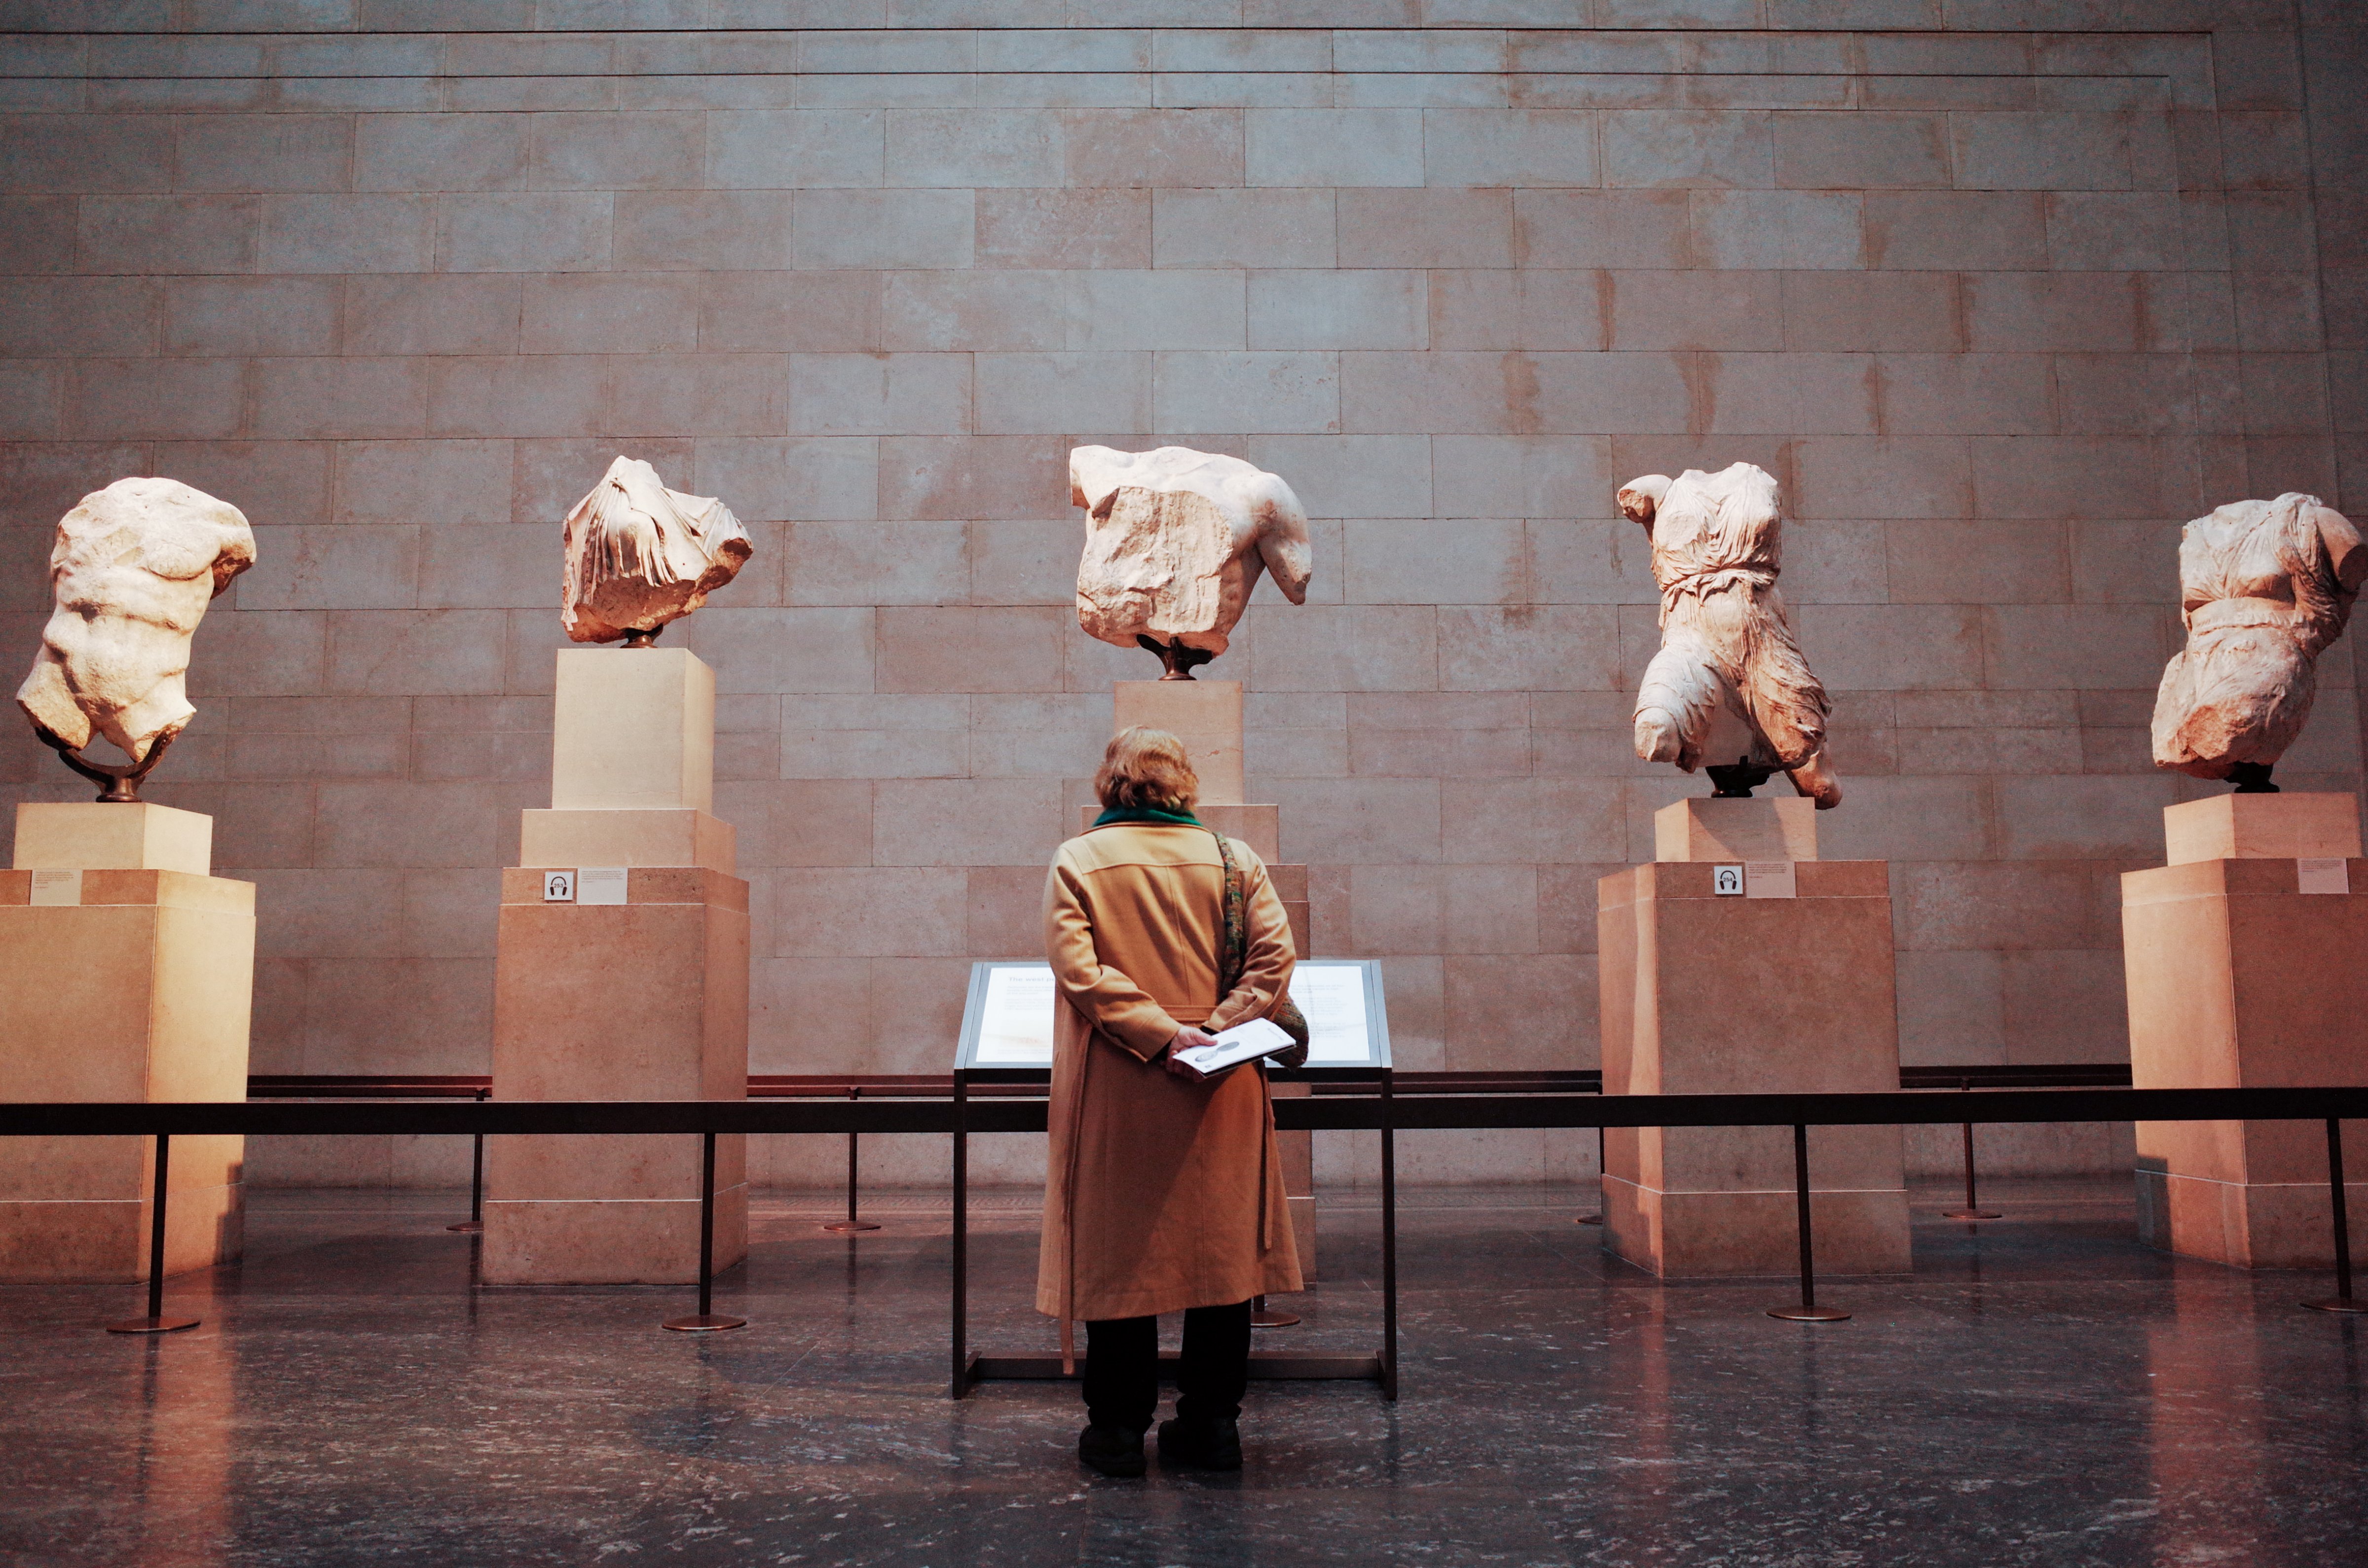 A woman looks at a section of the Parthenon Sculptures exhibit in the British Museum in London, England, on February 13, 2020. (David Cliff—NurPhoto/Getty Images)